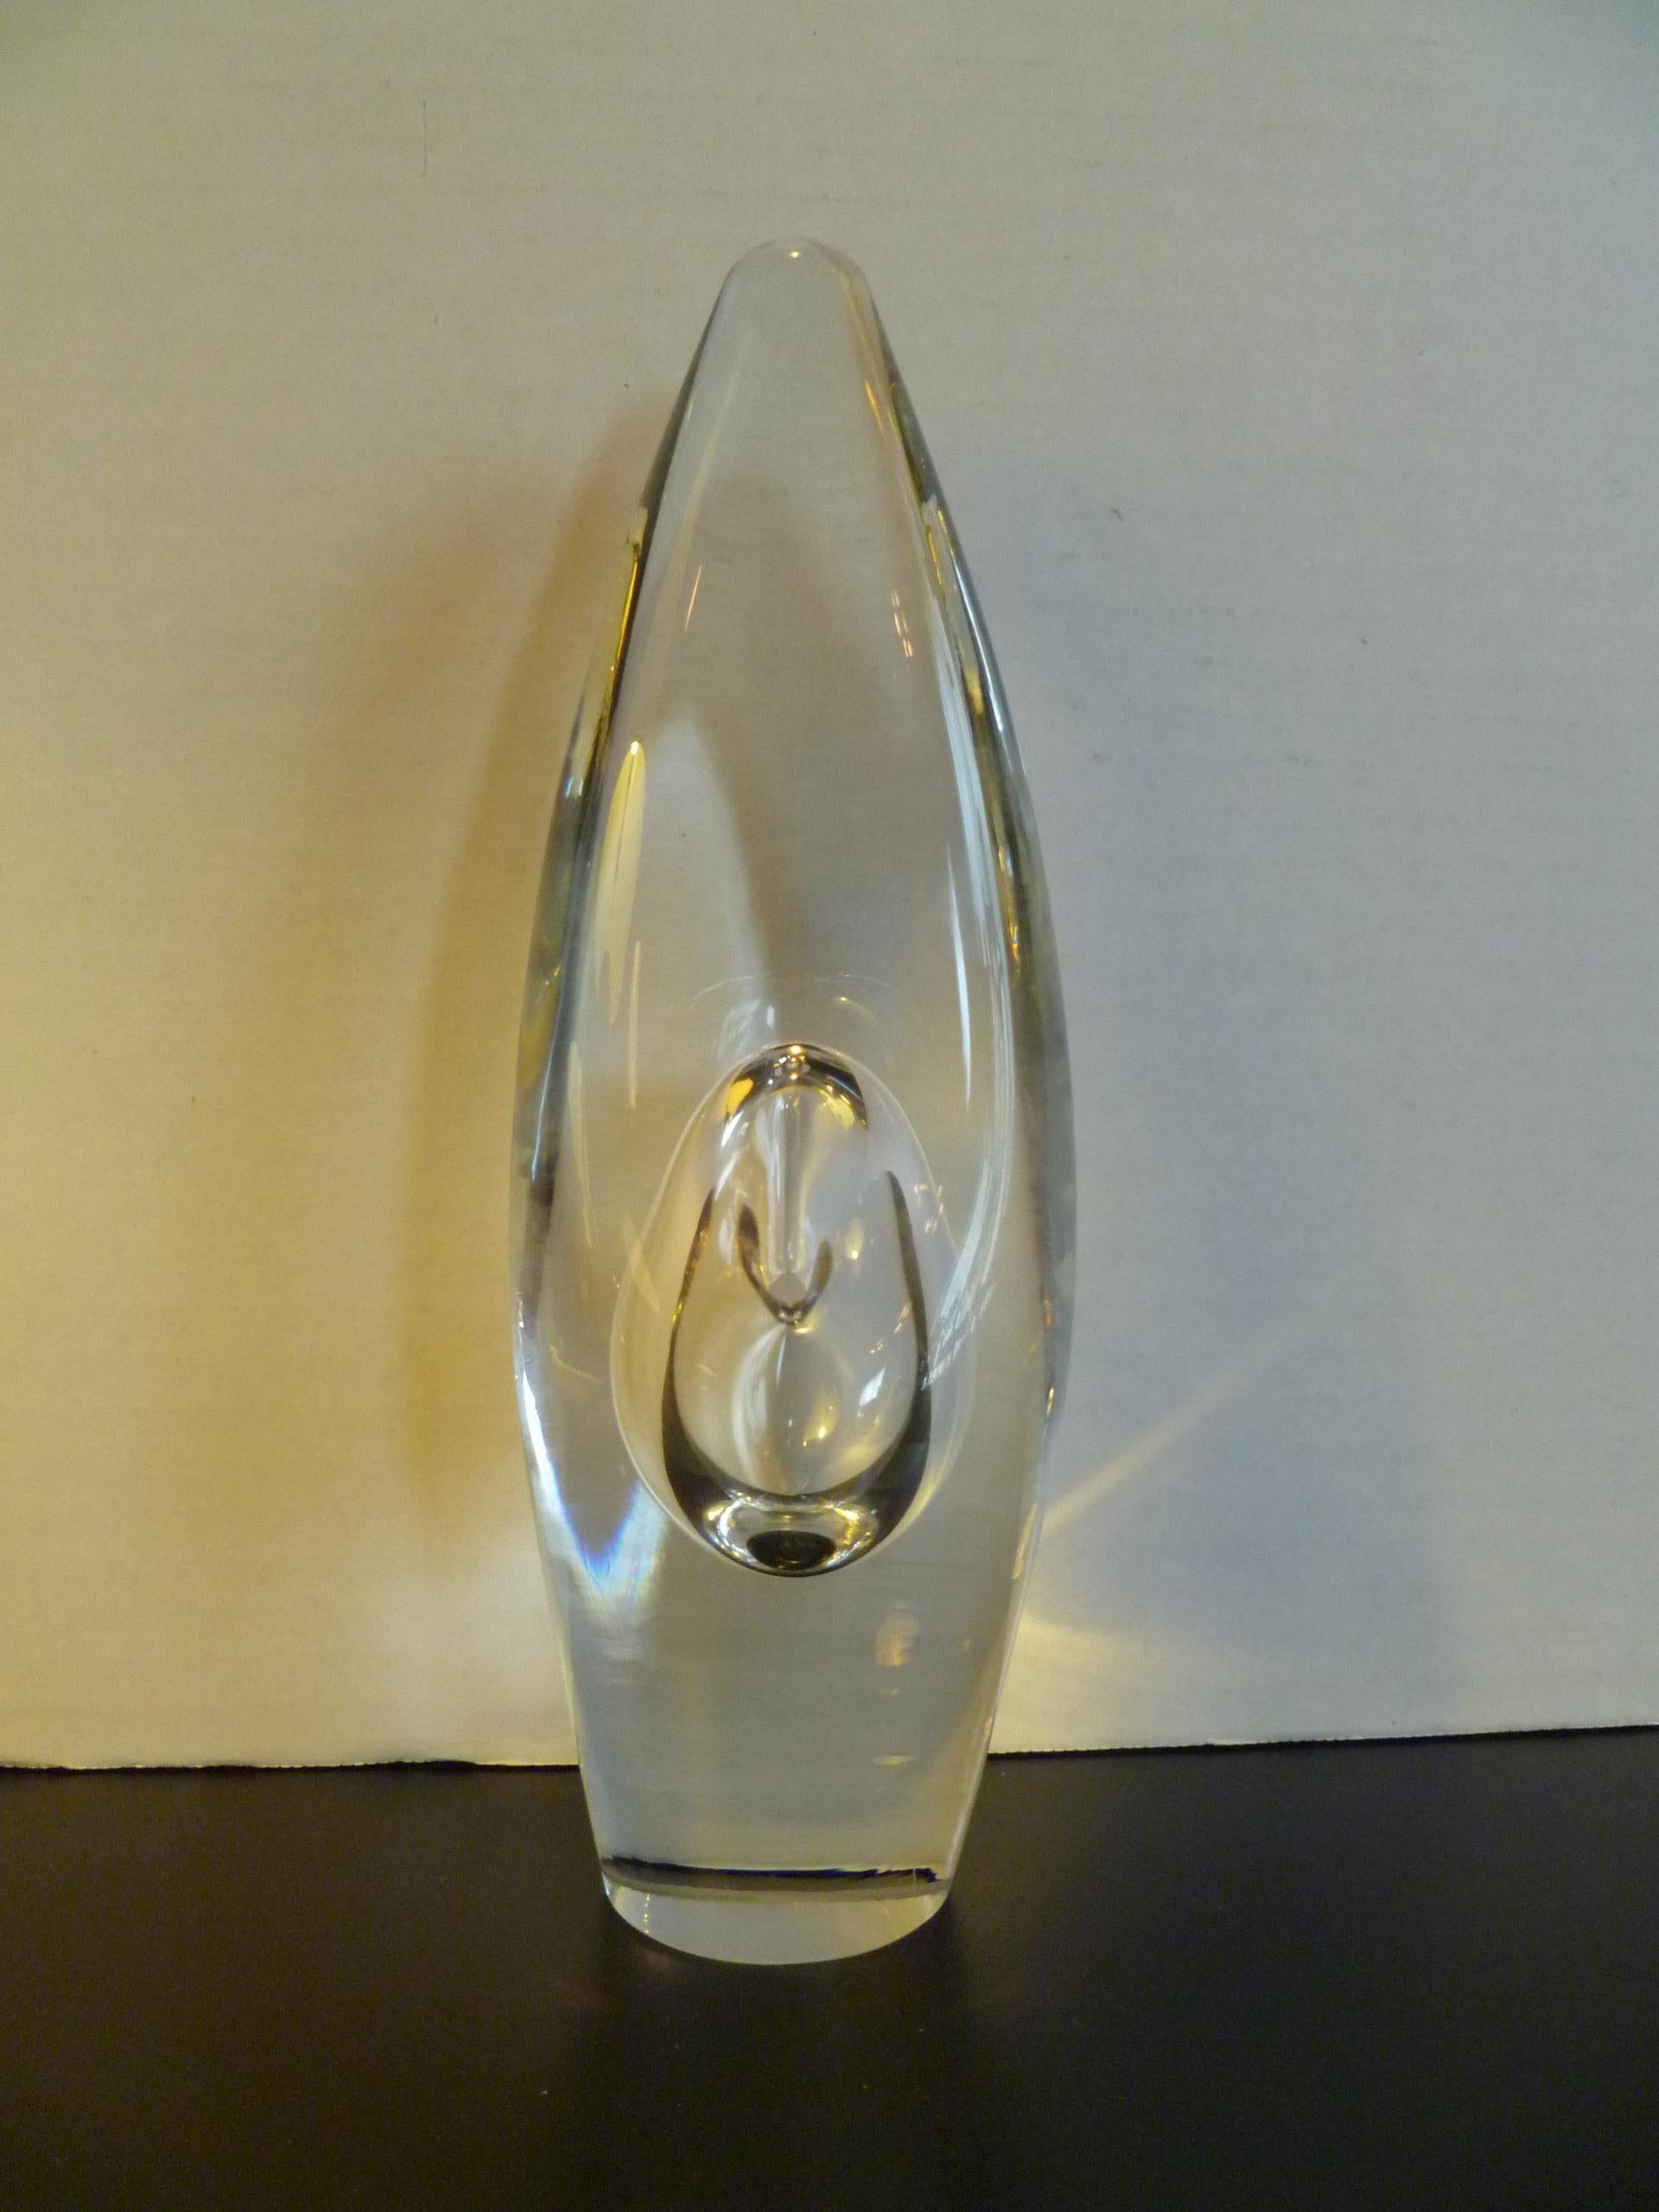 REDUCED FROM $790....From Finnish master glassmaker Timo Sarpaneva 1926-2006, a 1987 production of the iconic orchid sculptural bud vase in blown lead crystal. Designed in 1953 in clear crystal is meant for a single bloom whose stem would come to